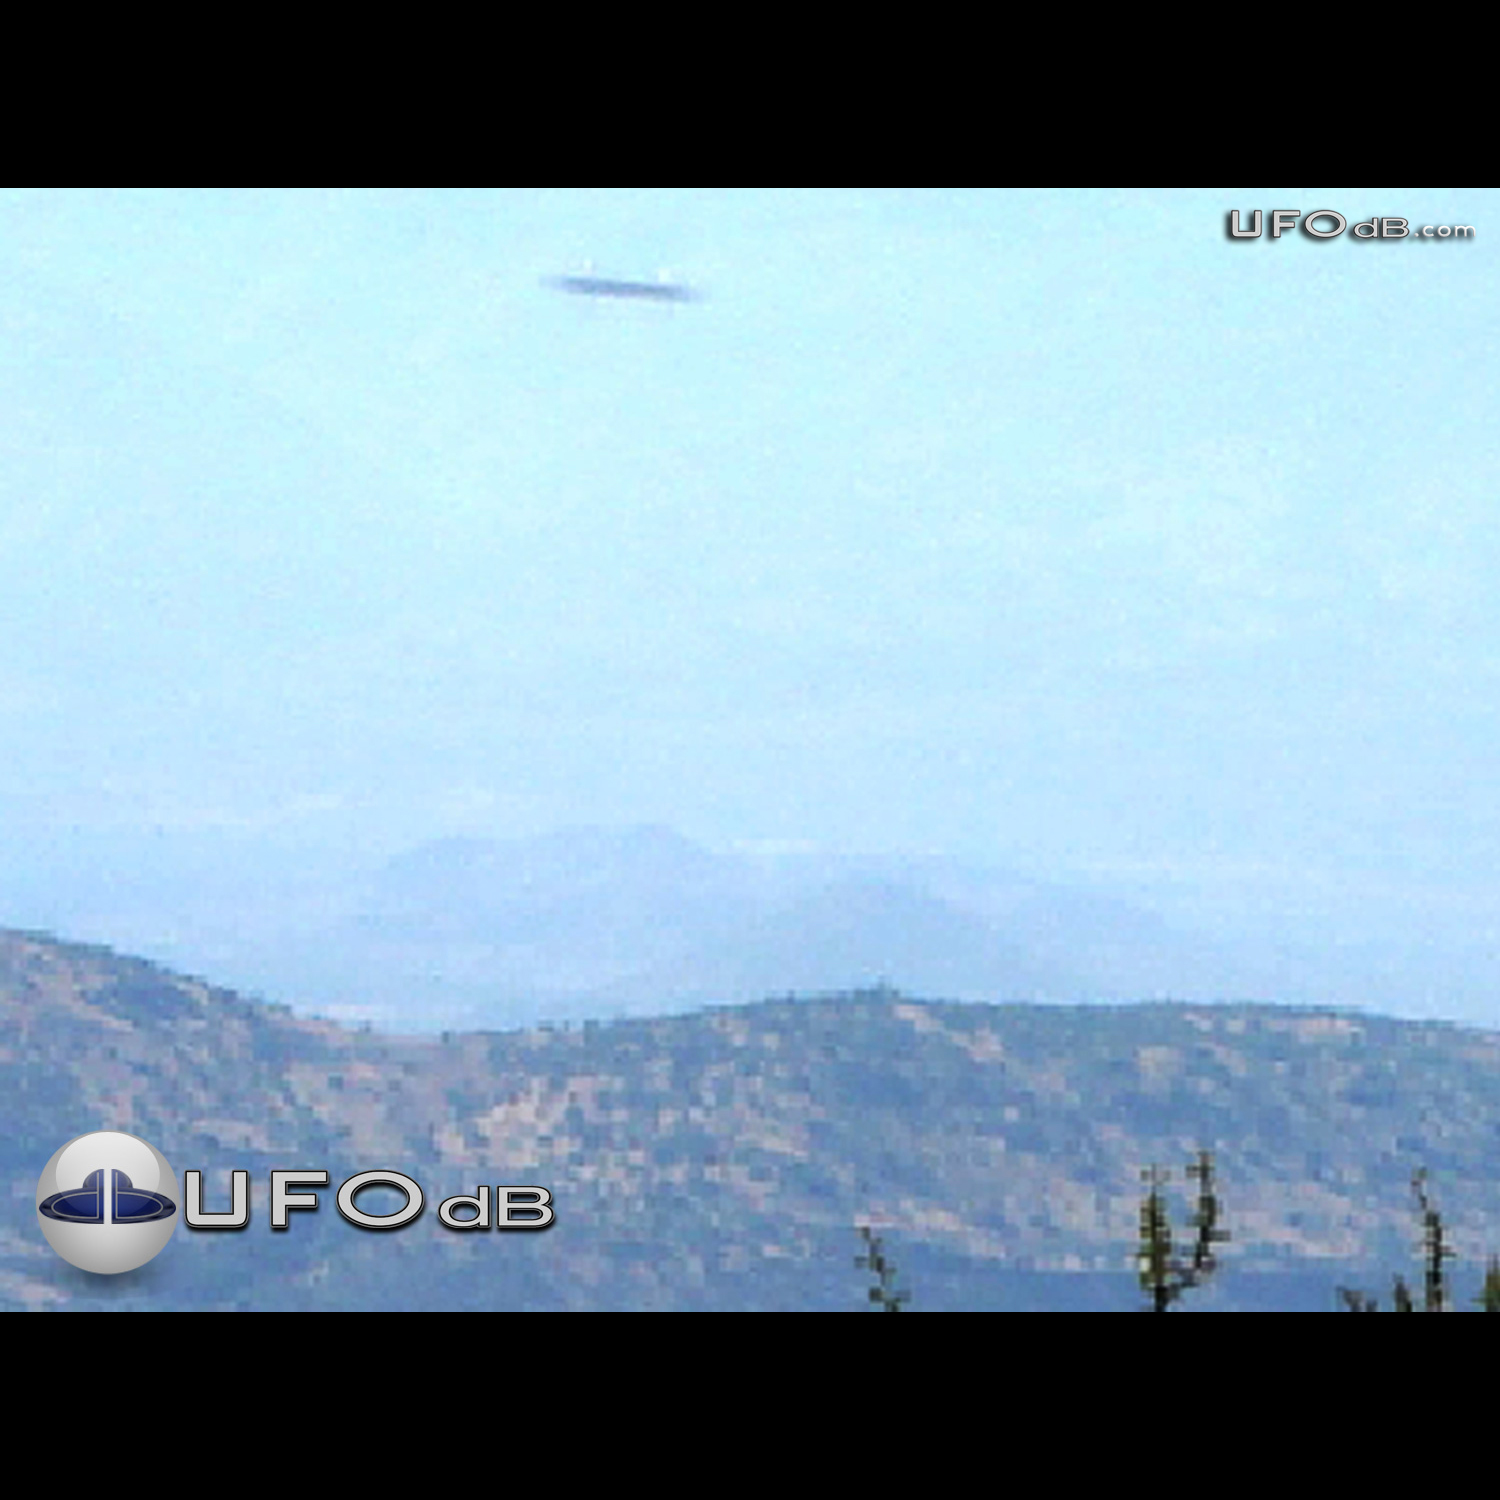 Colombia Saucer flying over the hills caught on picture | March 3 2003 UFO Picture #322-1